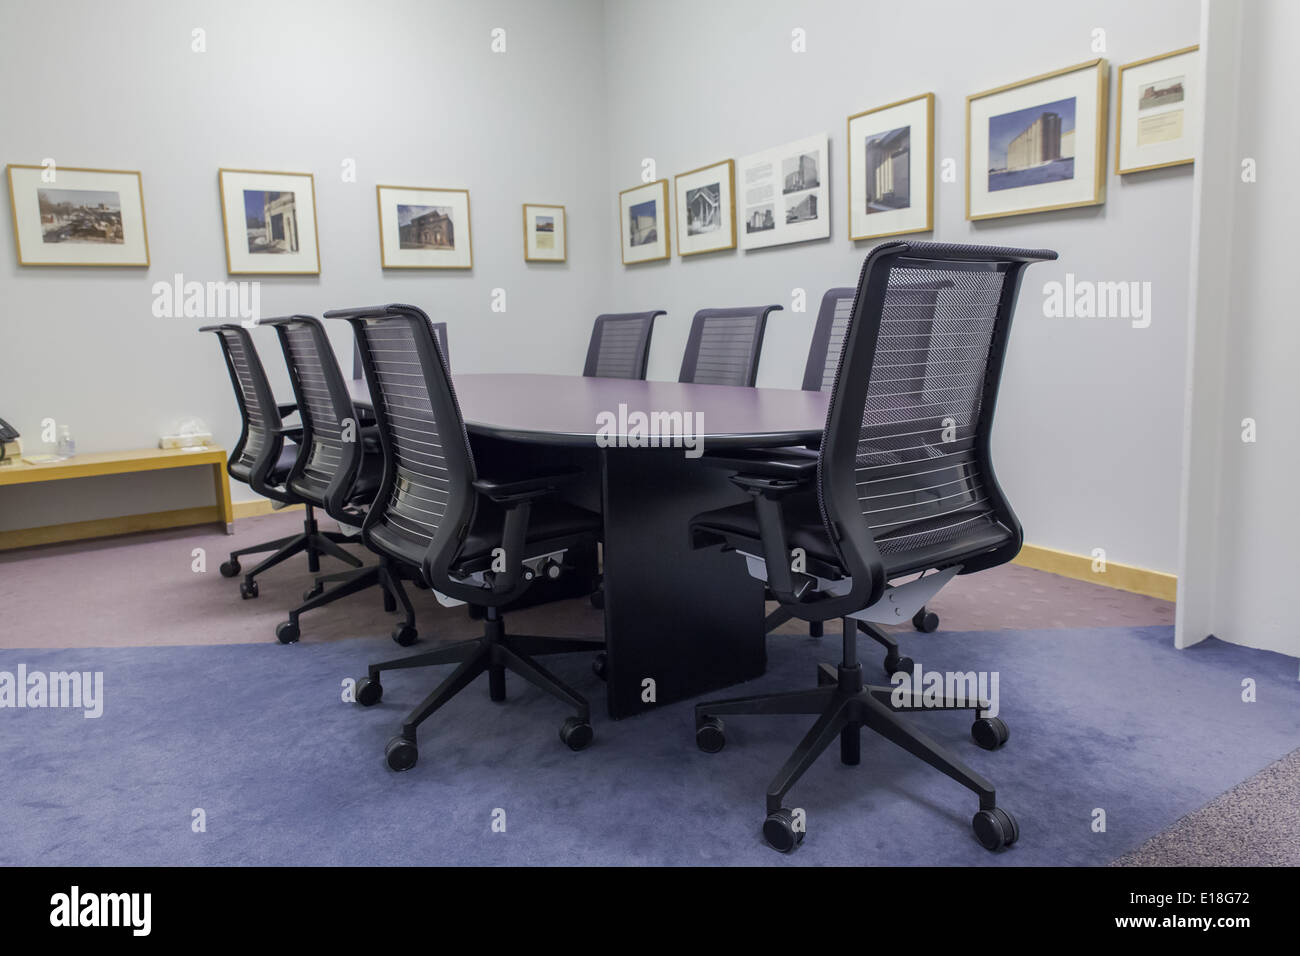 small empty office meeting room chair table Stock Photo